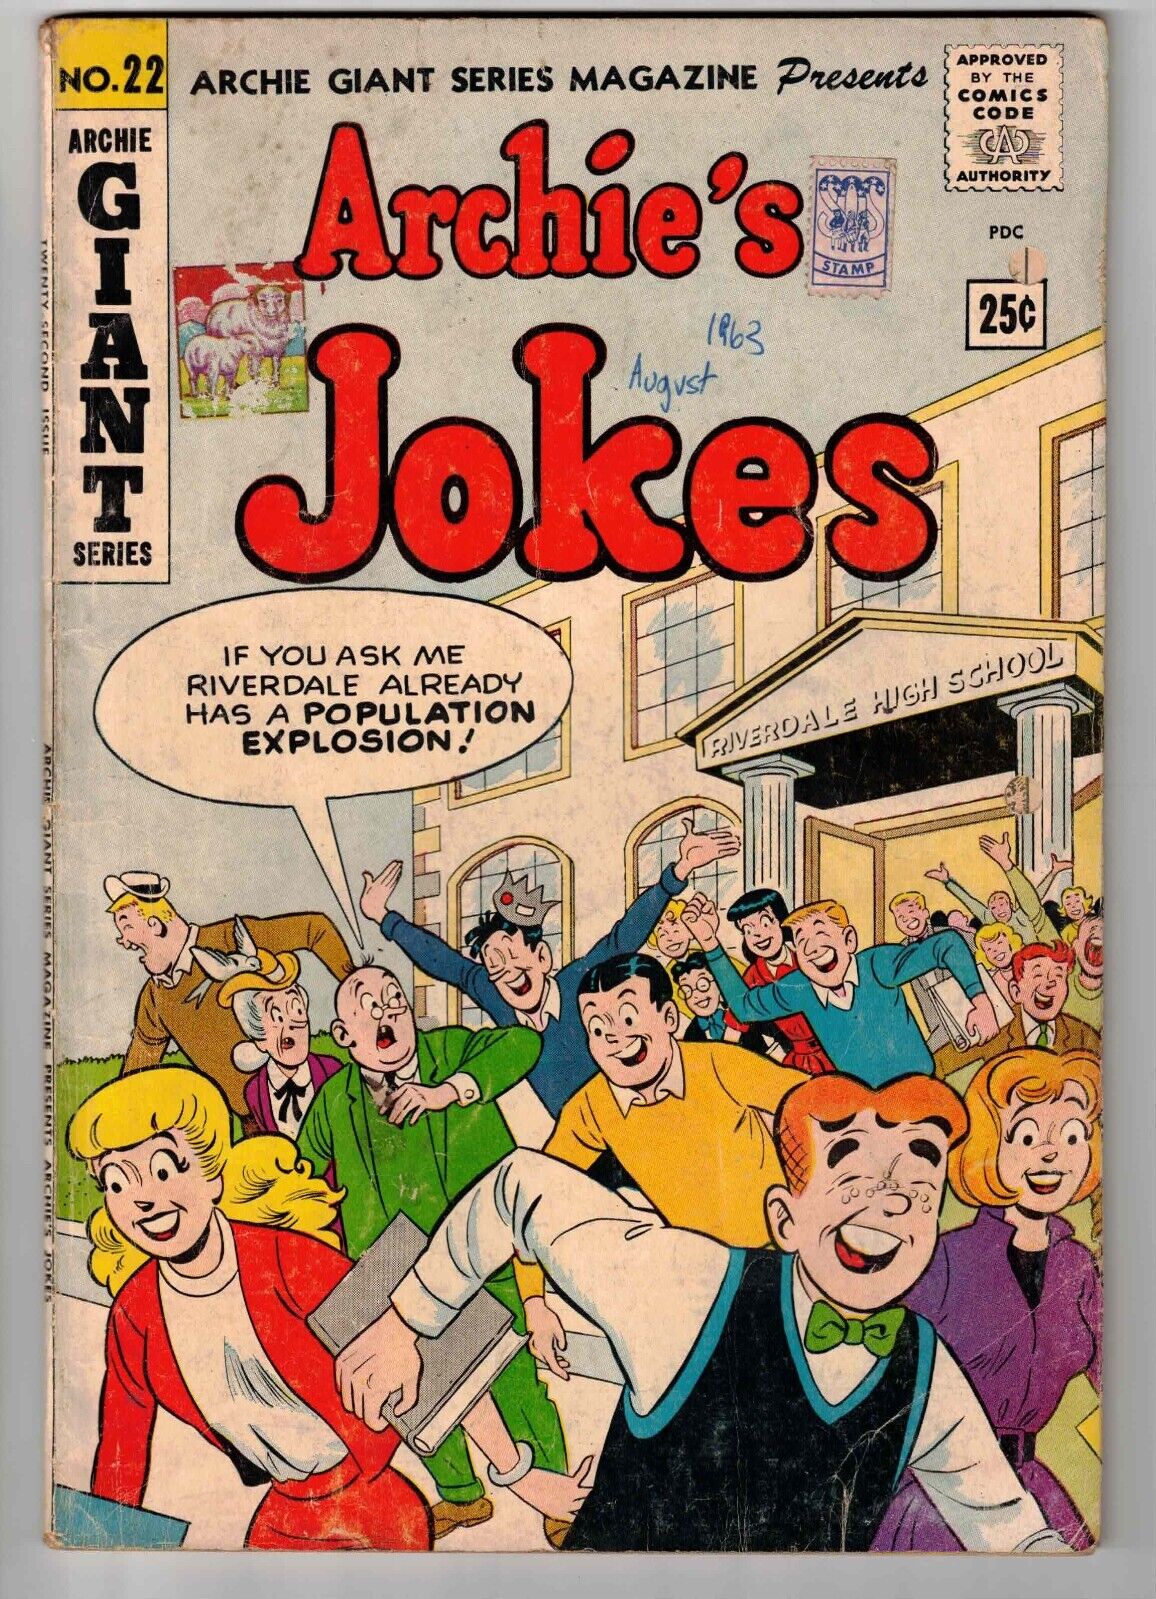 ARCHIE GIANT SERIES MAGAZINE #22 1963 SILVER AGE GIANT 68 PAGES